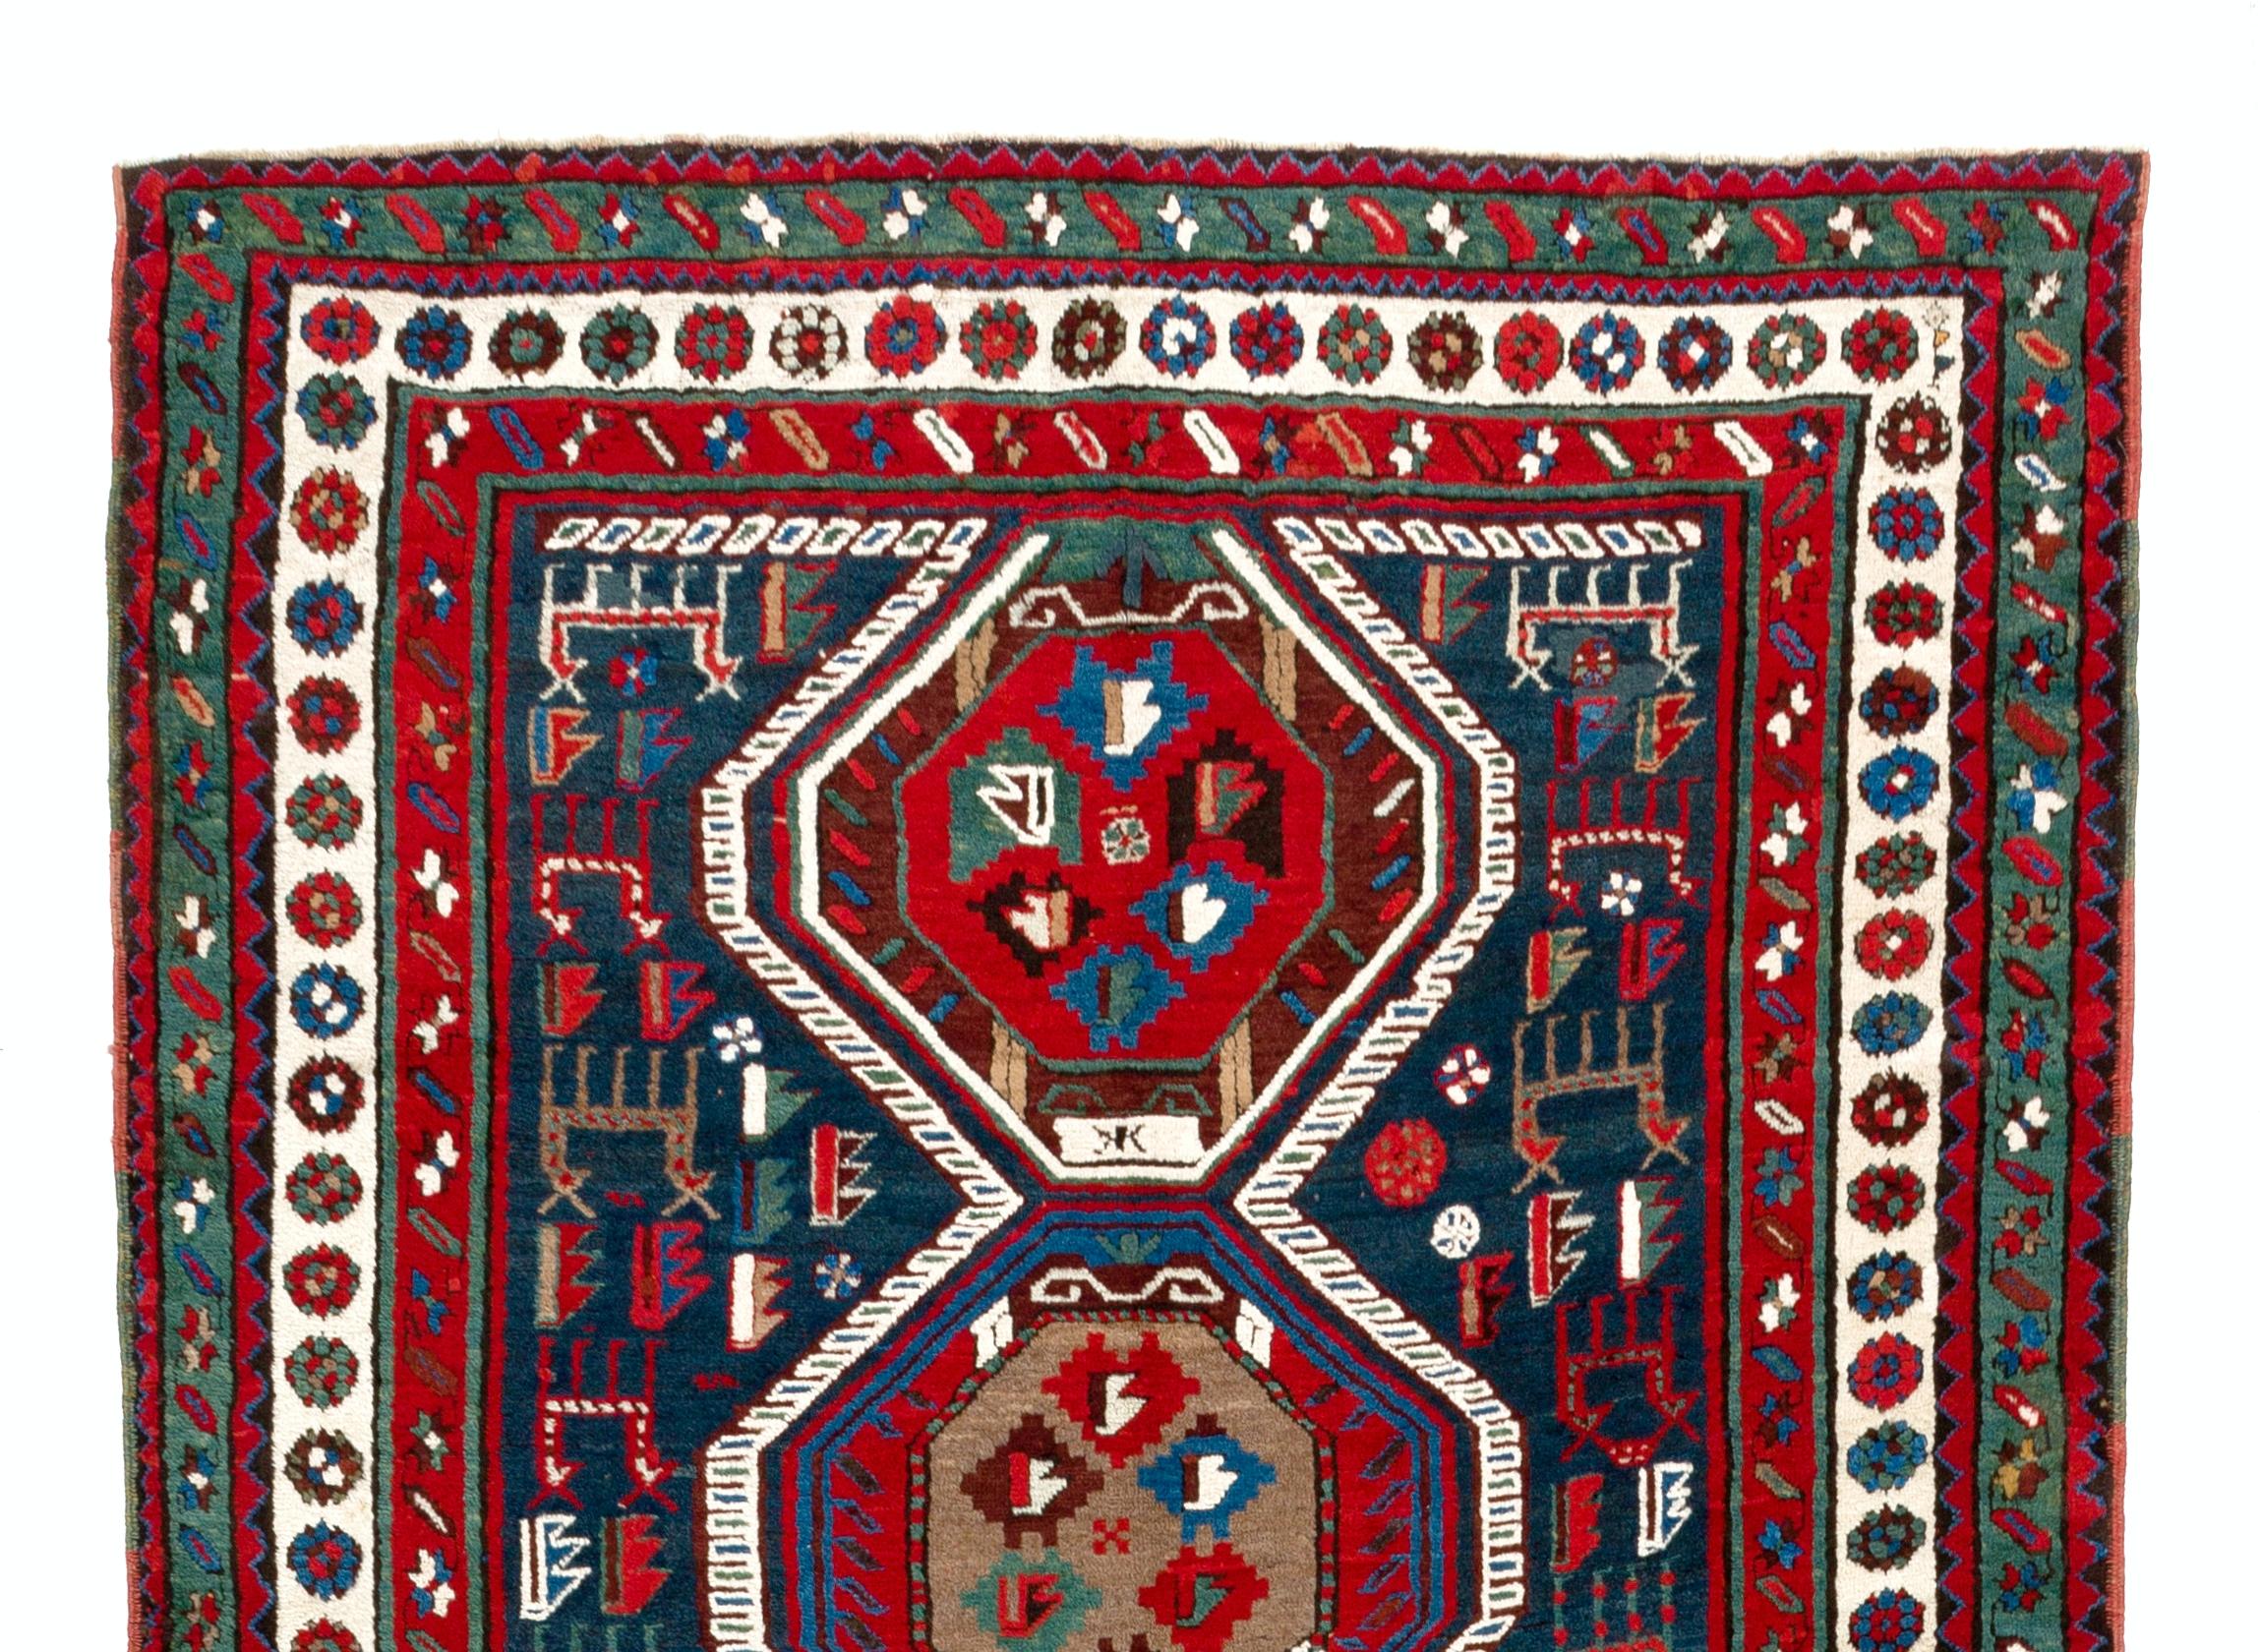 The Moghan Shahsavan rugs are typically made from wool or a wool-cotton blend and feature a tight, dense weave. The designs are usually geometric and feature bold, contrasting colors such as red, blue, and ivory. The designs may also incorporate